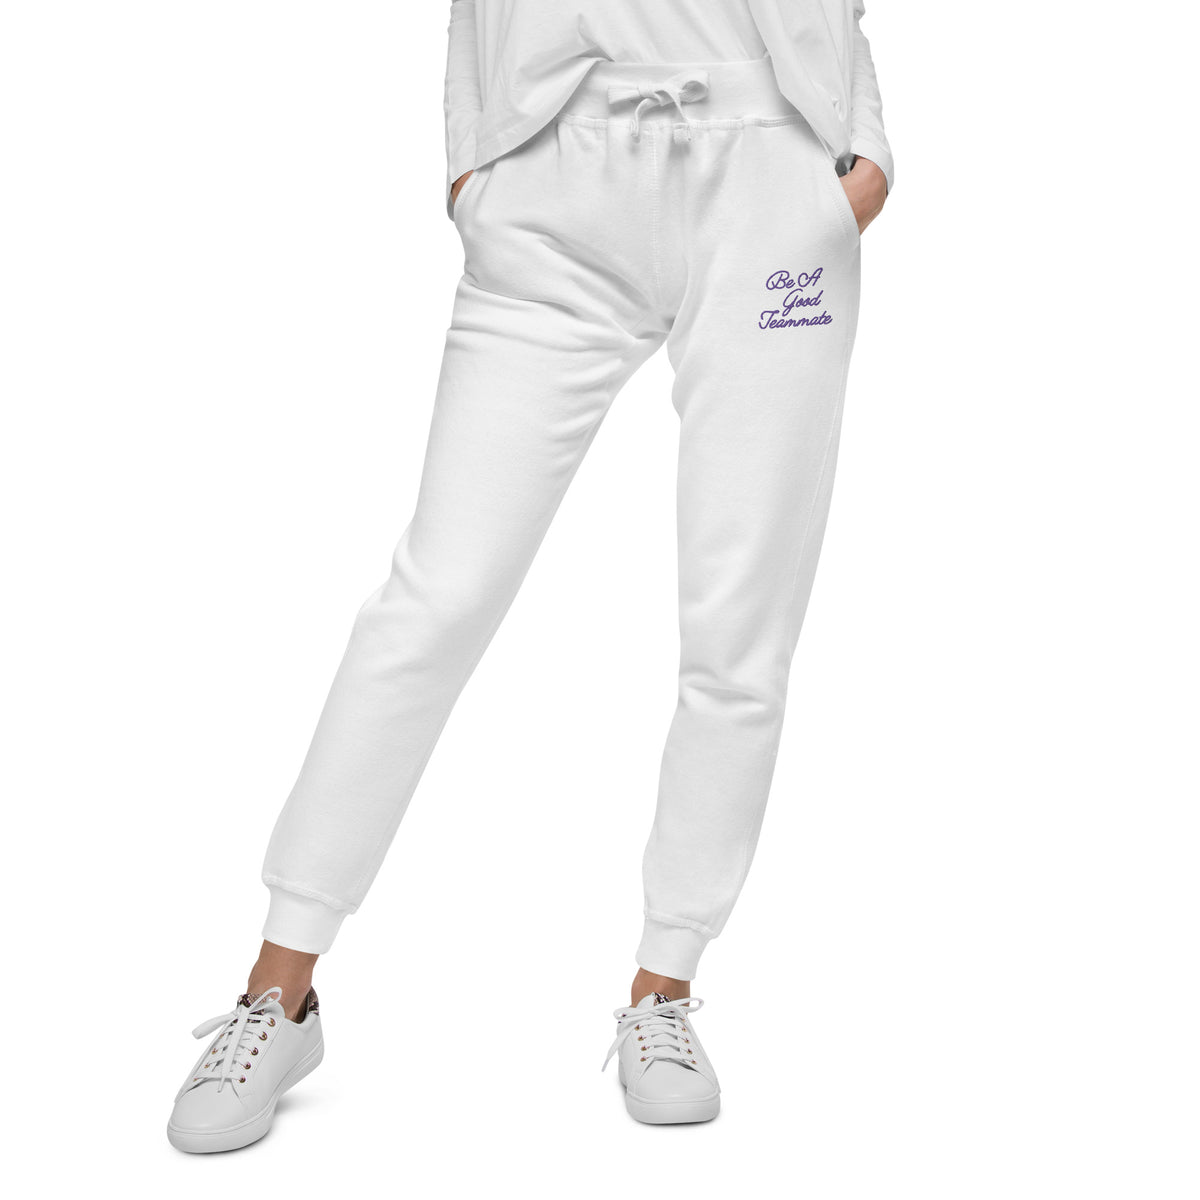 Be A Good Teammate Embroidered Joggers